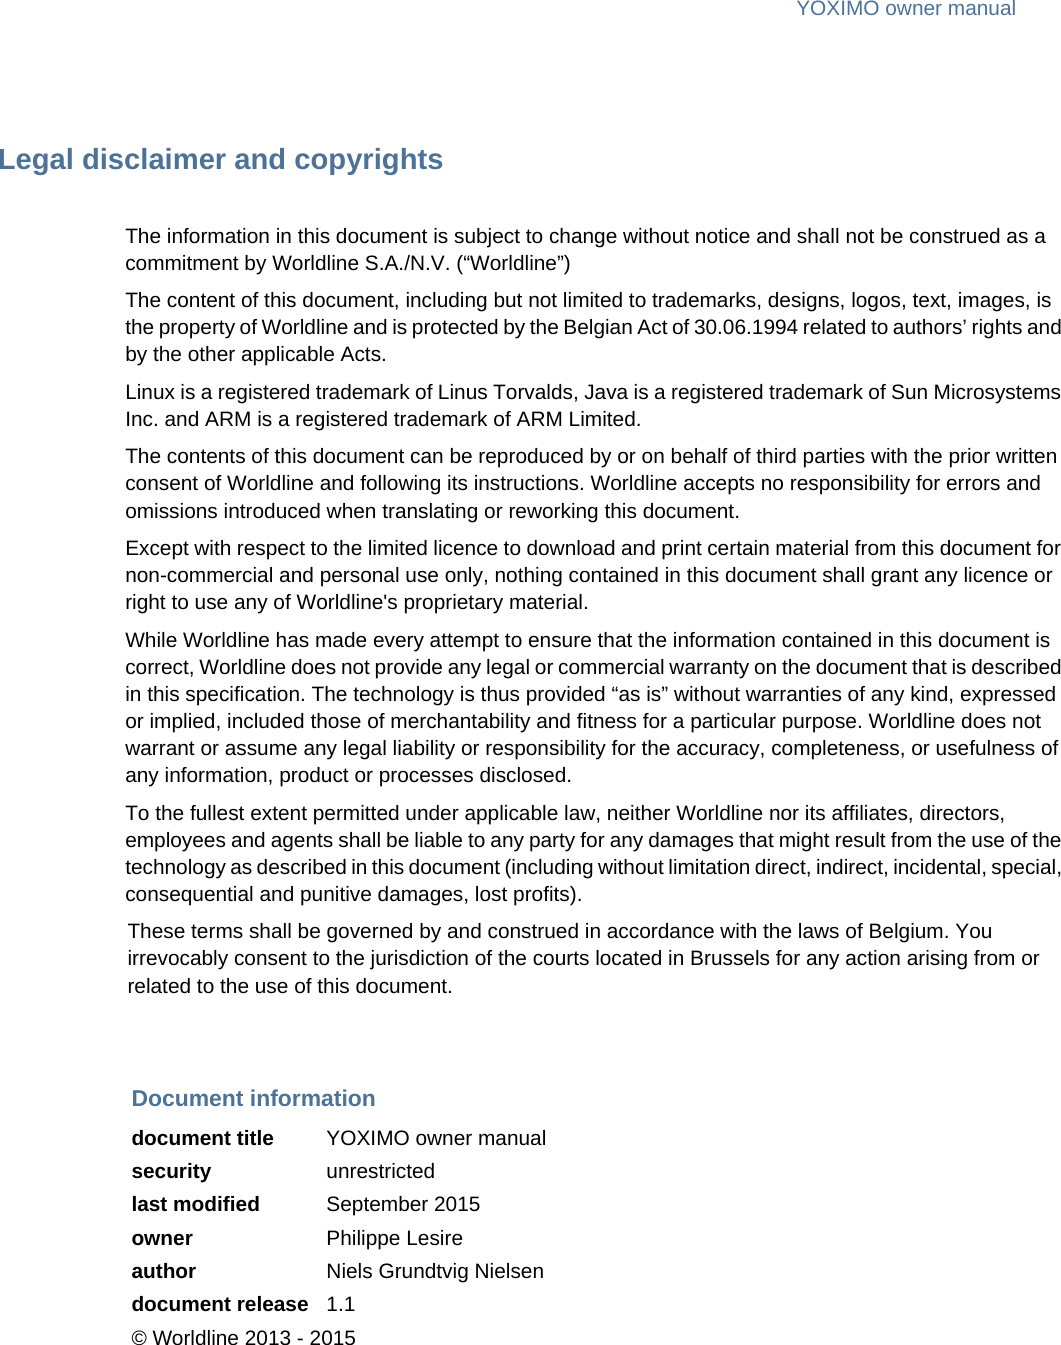 YOXIMO owner manualLegal disclaimer and copyrightsThe information in this document is subject to change without notice and shall not be construed as a commitment by Worldline S.A./N.V. (“Worldline”)The content of this document, including but not limited to trademarks, designs, logos, text, images, is the property of Worldline and is protected by the Belgian Act of 30.06.1994 related to authors’ rights and by the other applicable Acts.Linux is a registered trademark of Linus Torvalds, Java is a registered trademark of Sun Microsystems Inc. and ARM is a registered trademark of ARM Limited.The contents of this document can be reproduced by or on behalf of third parties with the prior written consent of Worldline and following its instructions. Worldline accepts no responsibility for errors and omissions introduced when translating or reworking this document.Except with respect to the limited licence to download and print certain material from this document for non-commercial and personal use only, nothing contained in this document shall grant any licence or right to use any of Worldline&apos;s proprietary material.While Worldline has made every attempt to ensure that the information contained in this document is correct, Worldline does not provide any legal or commercial warranty on the document that is described in this specification. The technology is thus provided “as is” without warranties of any kind, expressed or implied, included those of merchantability and fitness for a particular purpose. Worldline does not warrant or assume any legal liability or responsibility for the accuracy, completeness, or usefulness of any information, product or processes disclosed.To the fullest extent permitted under applicable law, neither Worldline nor its affiliates, directors, employees and agents shall be liable to any party for any damages that might result from the use of the technology as described in this document (including without limitation direct, indirect, incidental, special, consequential and punitive damages, lost profits).These terms shall be governed by and construed in accordance with the laws of Belgium. You irrevocably consent to the jurisdiction of the courts located in Brussels for any action arising from or related to the use of this document.Document informationdocument title YOXIMO owner manualsecurity unrestrictedlast modified September 2015owner Philippe Lesireauthor Niels Grundtvig Nielsendocument release 1.1© Worldline 2013 - 2015